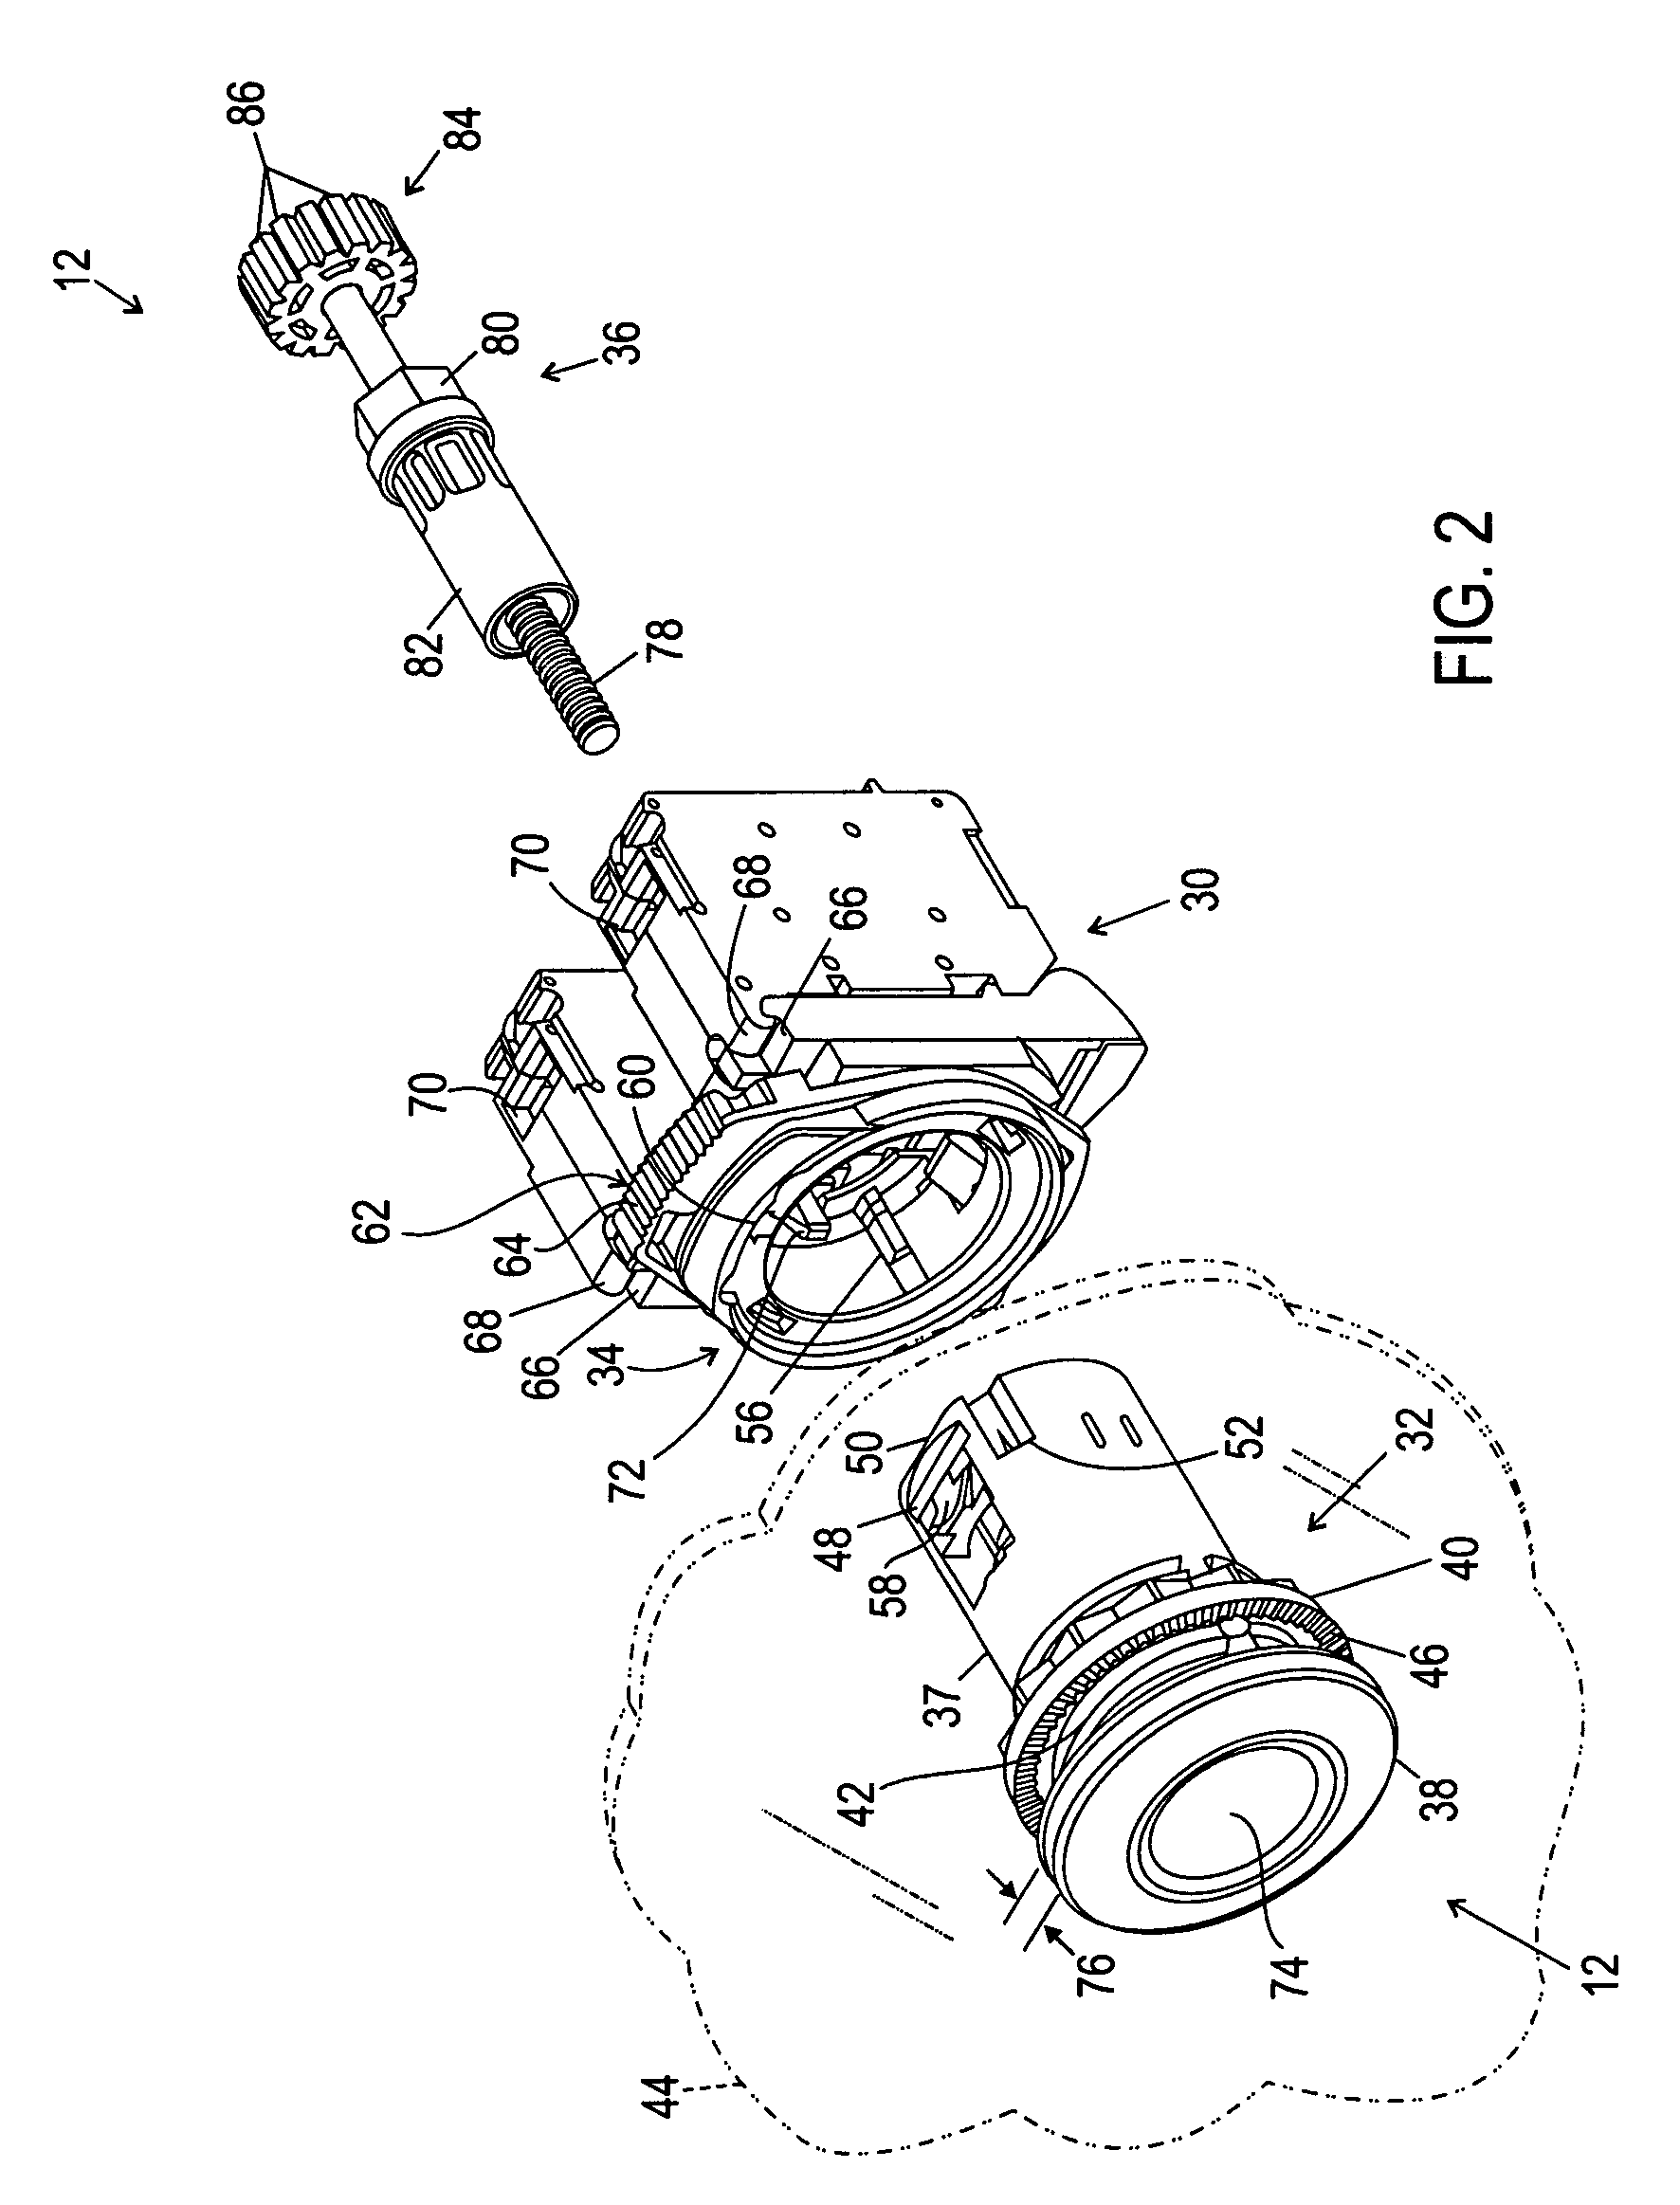 Dual function reset operator for an electrical device